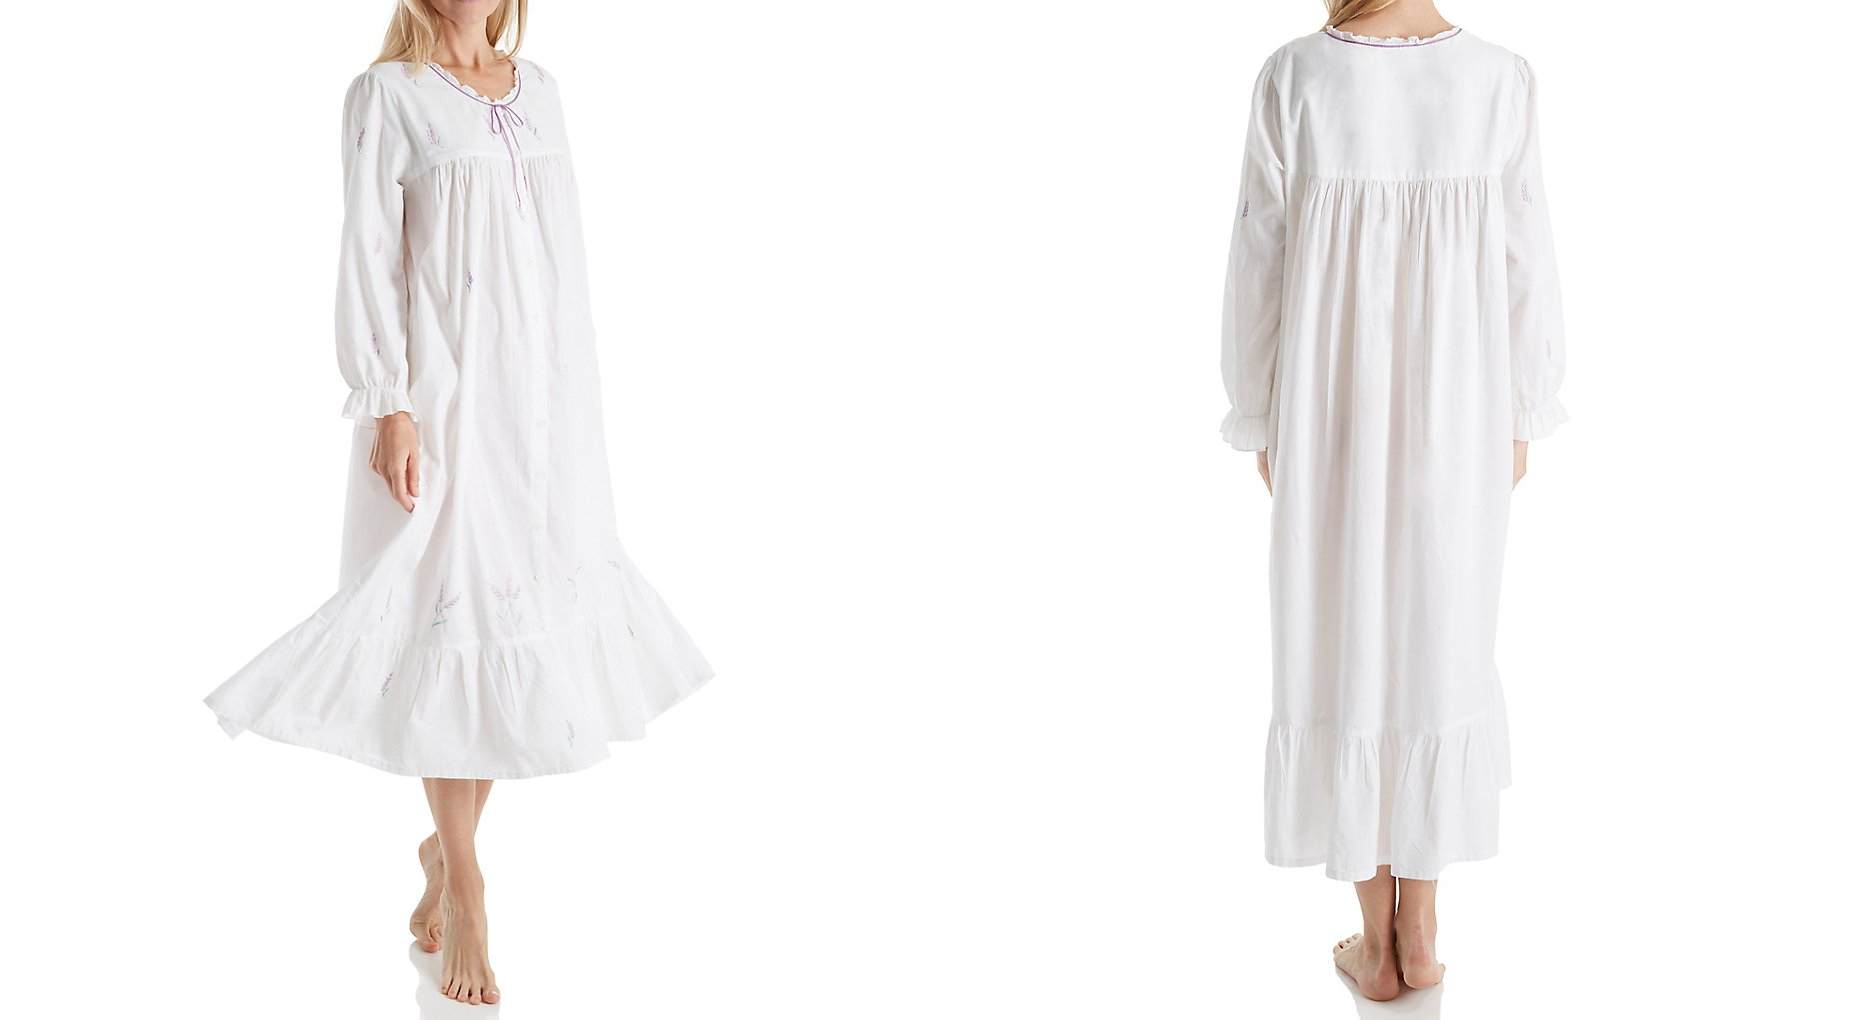 long nightgowns